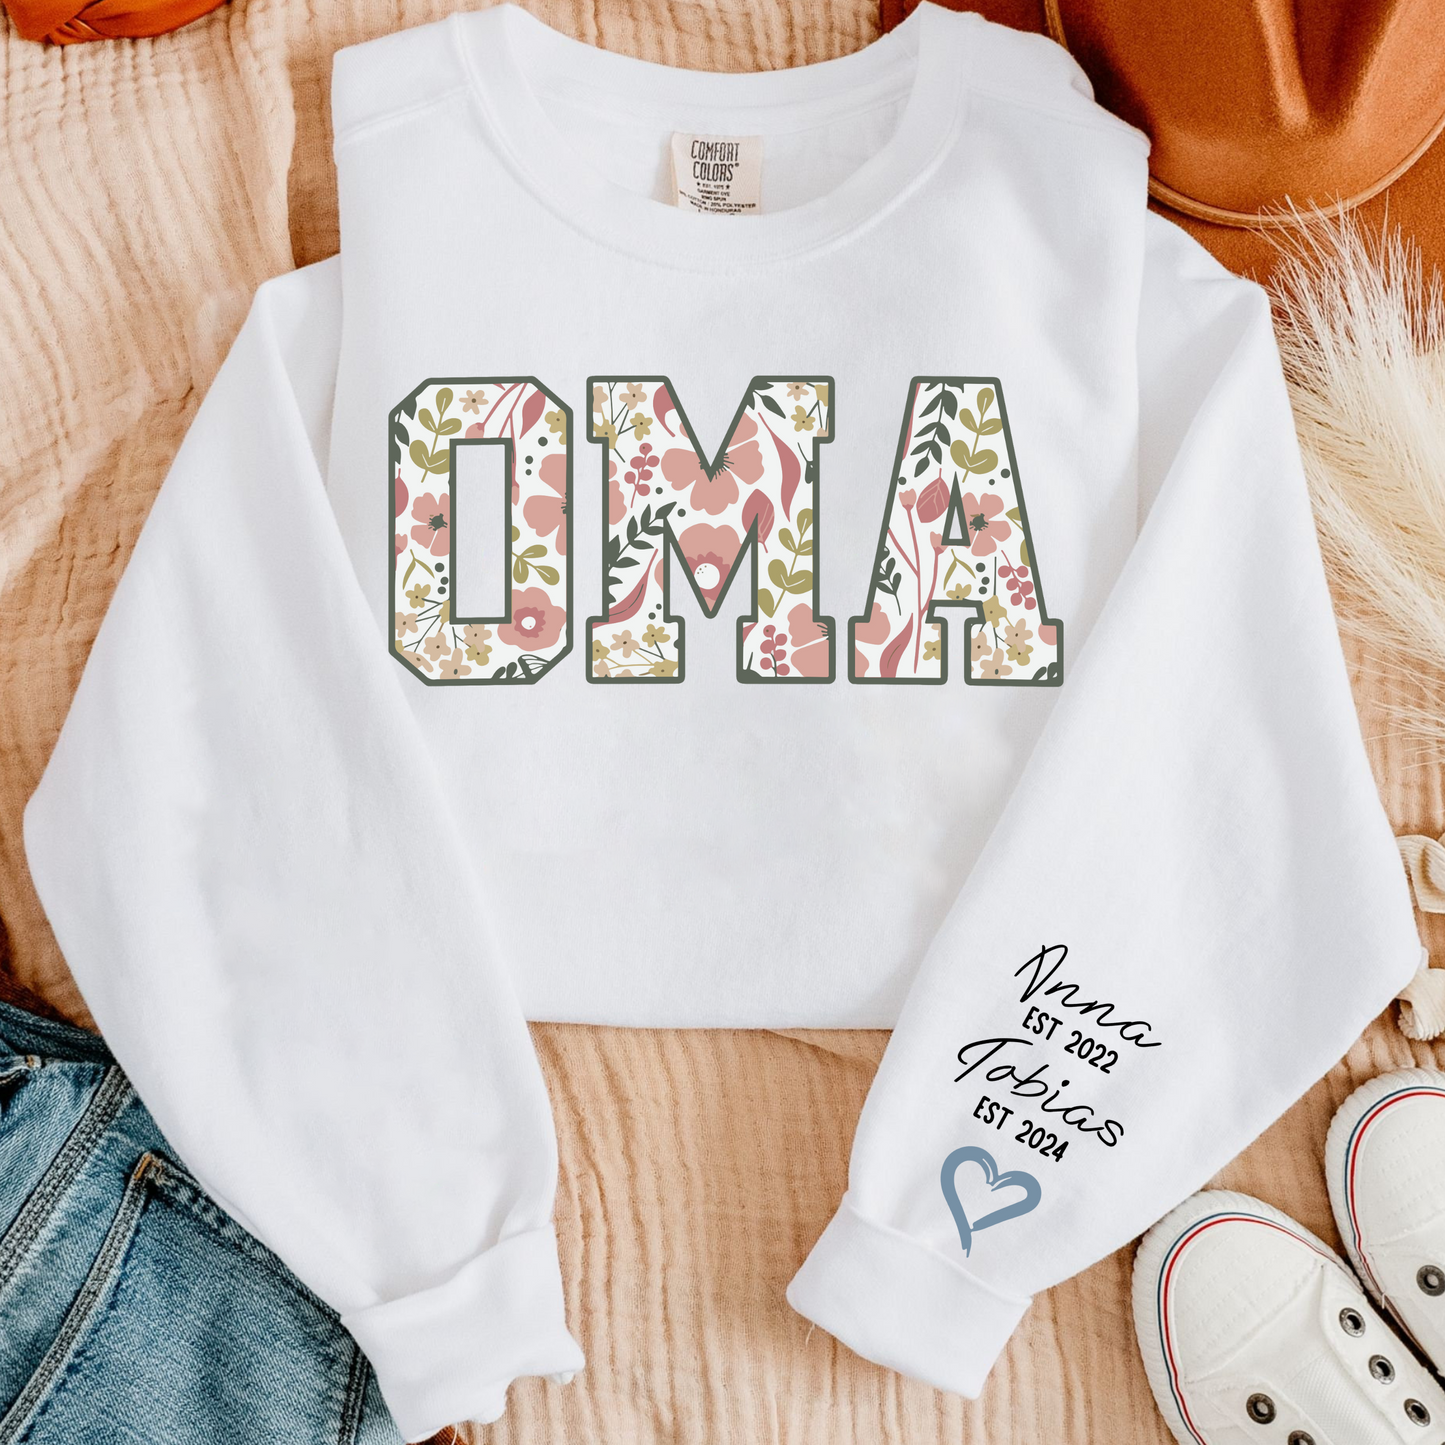 Personalized Oma Sweatshirt – Floral Design with Kids’ Names and Special Years